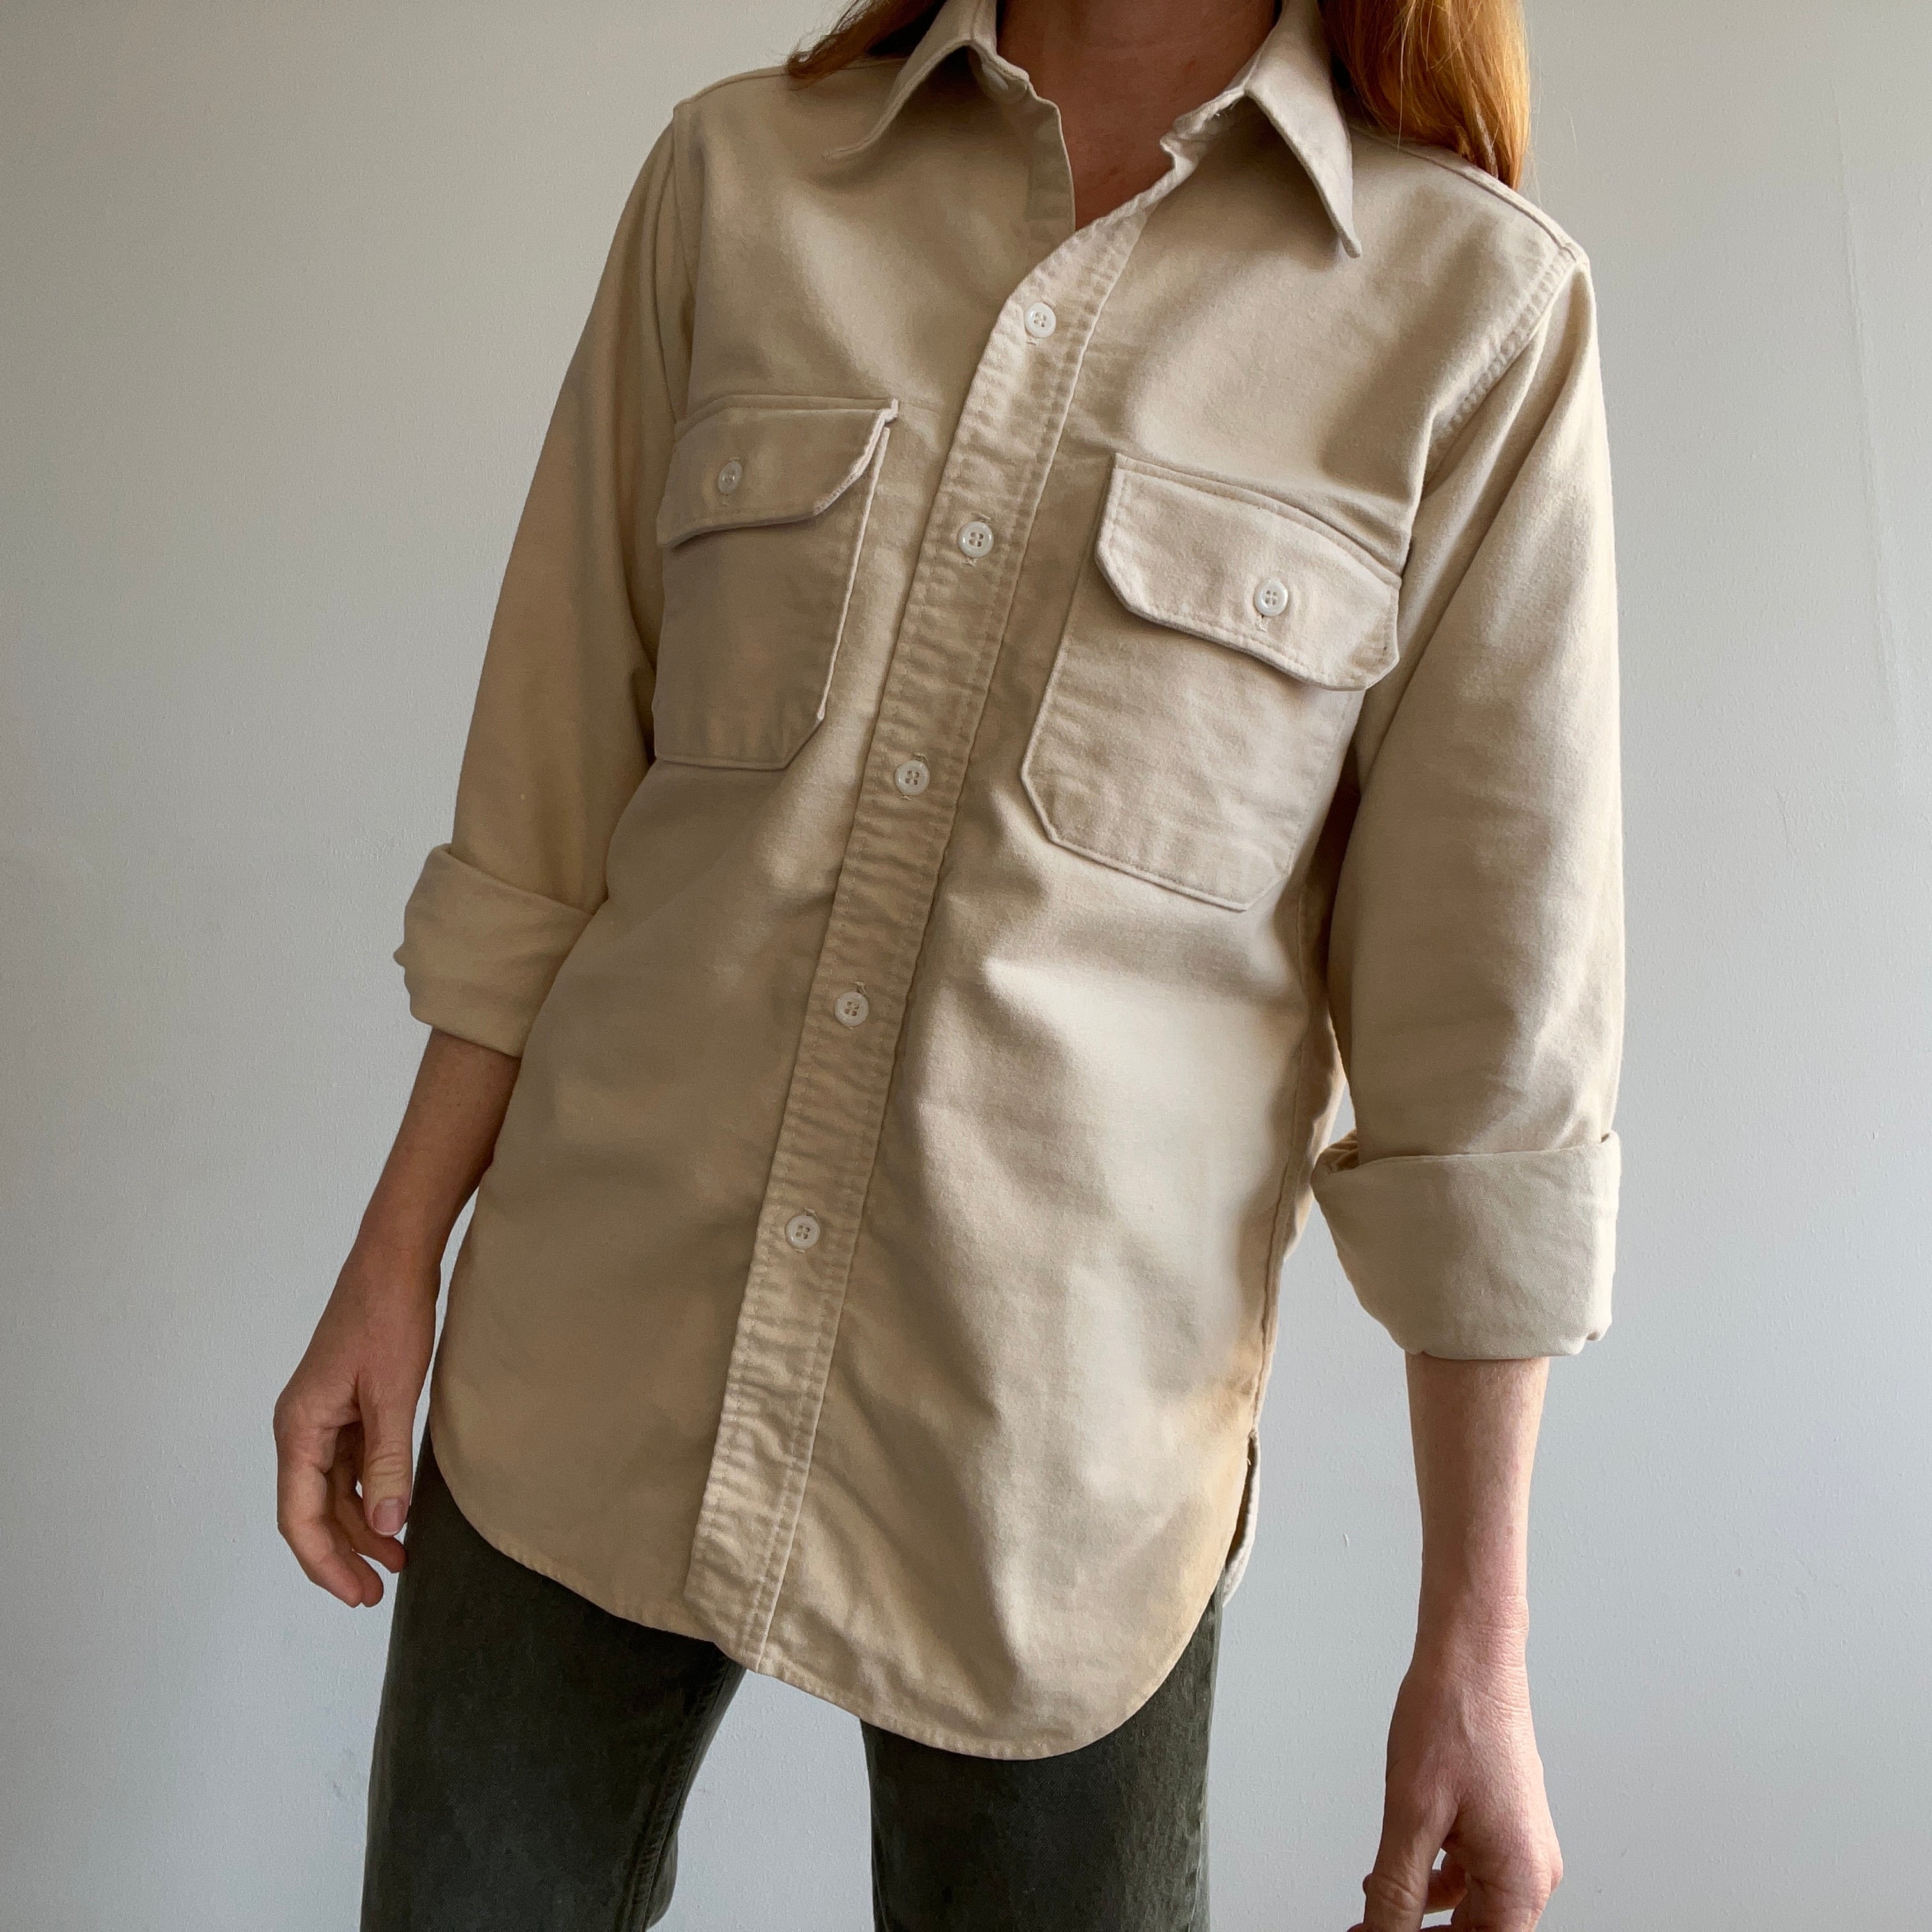 1970/80s USA MADE WOOLRICH Super Soft Cotton Flannel/Chamois